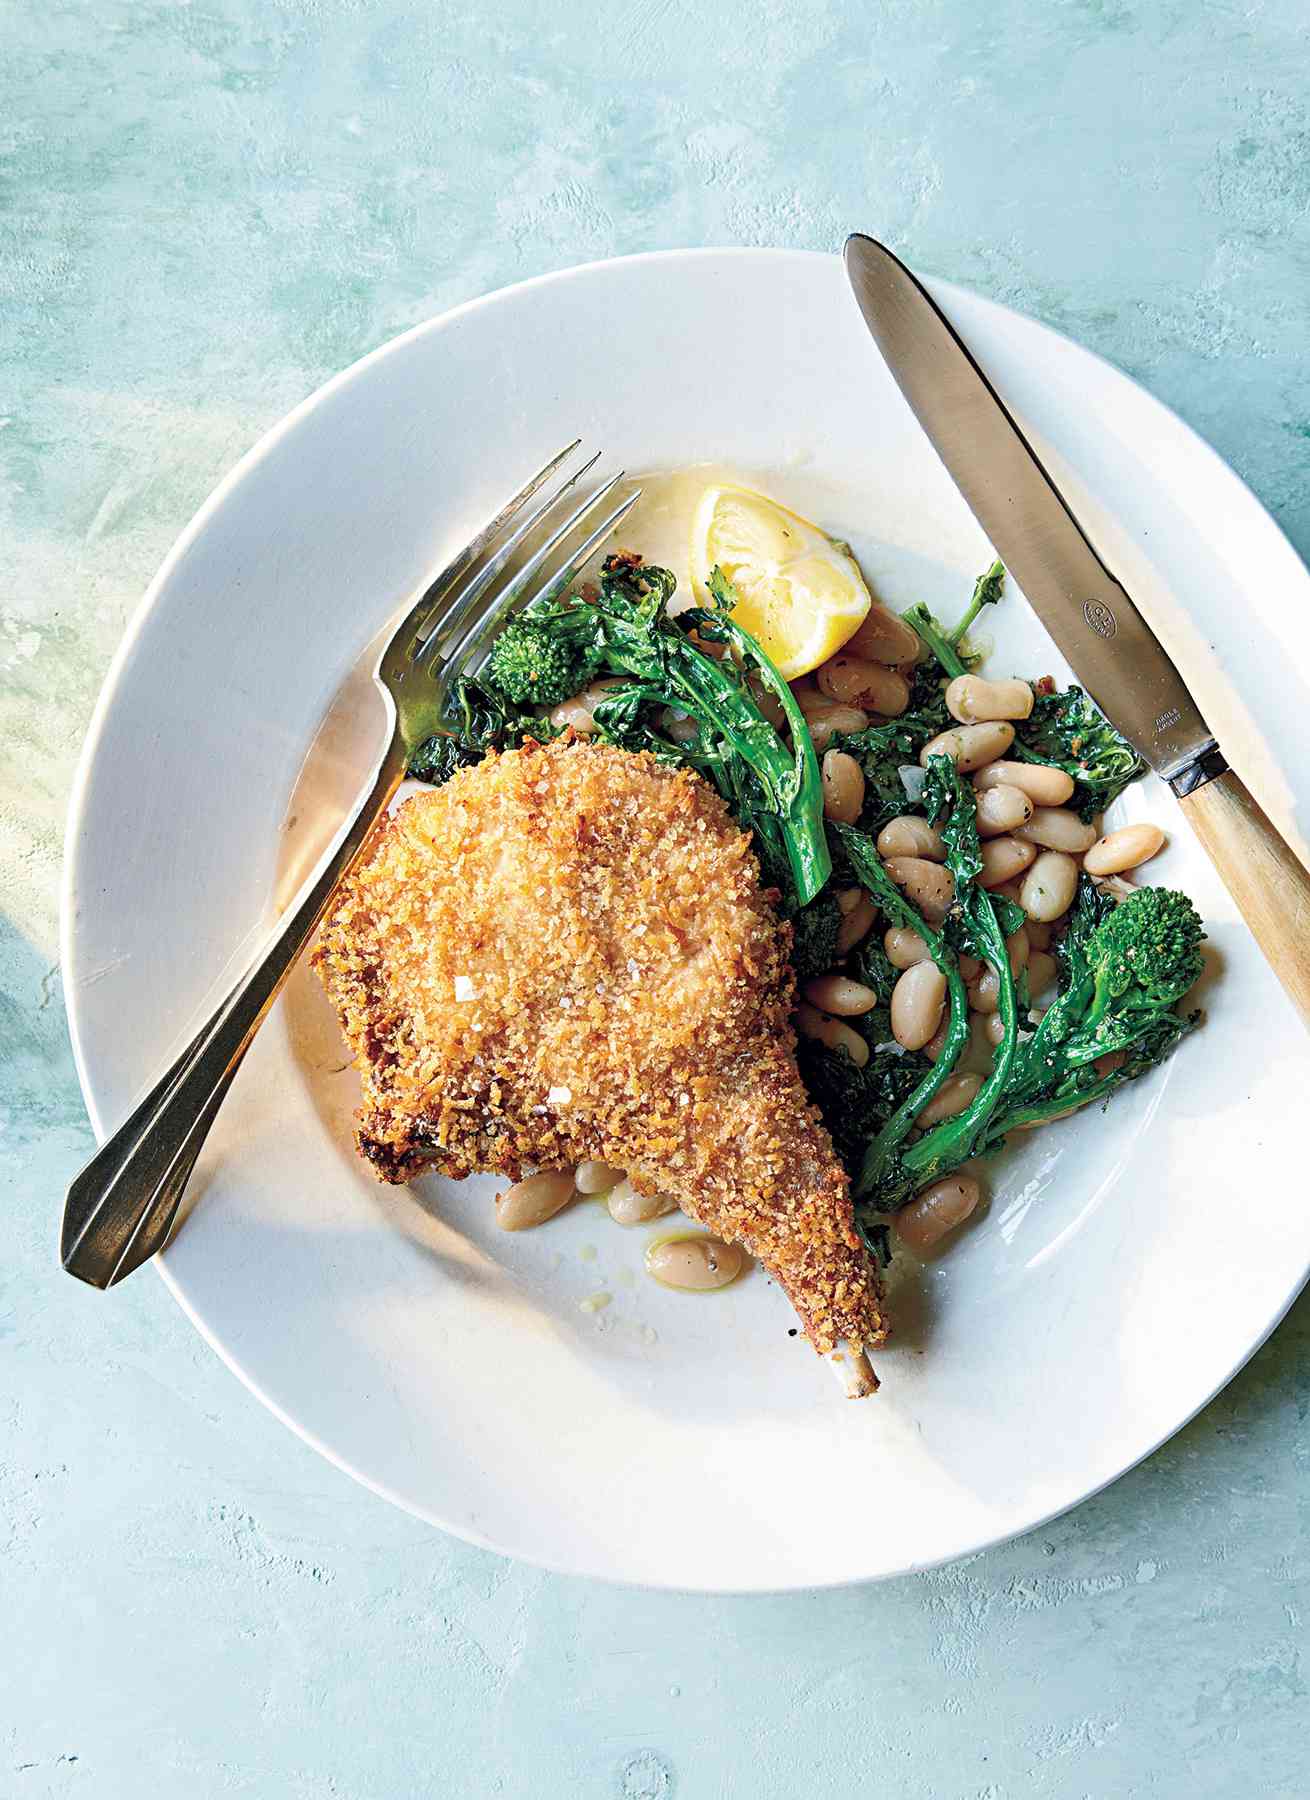 Panko-Crusted Pork Chops with Roasted Broccoli Rabe